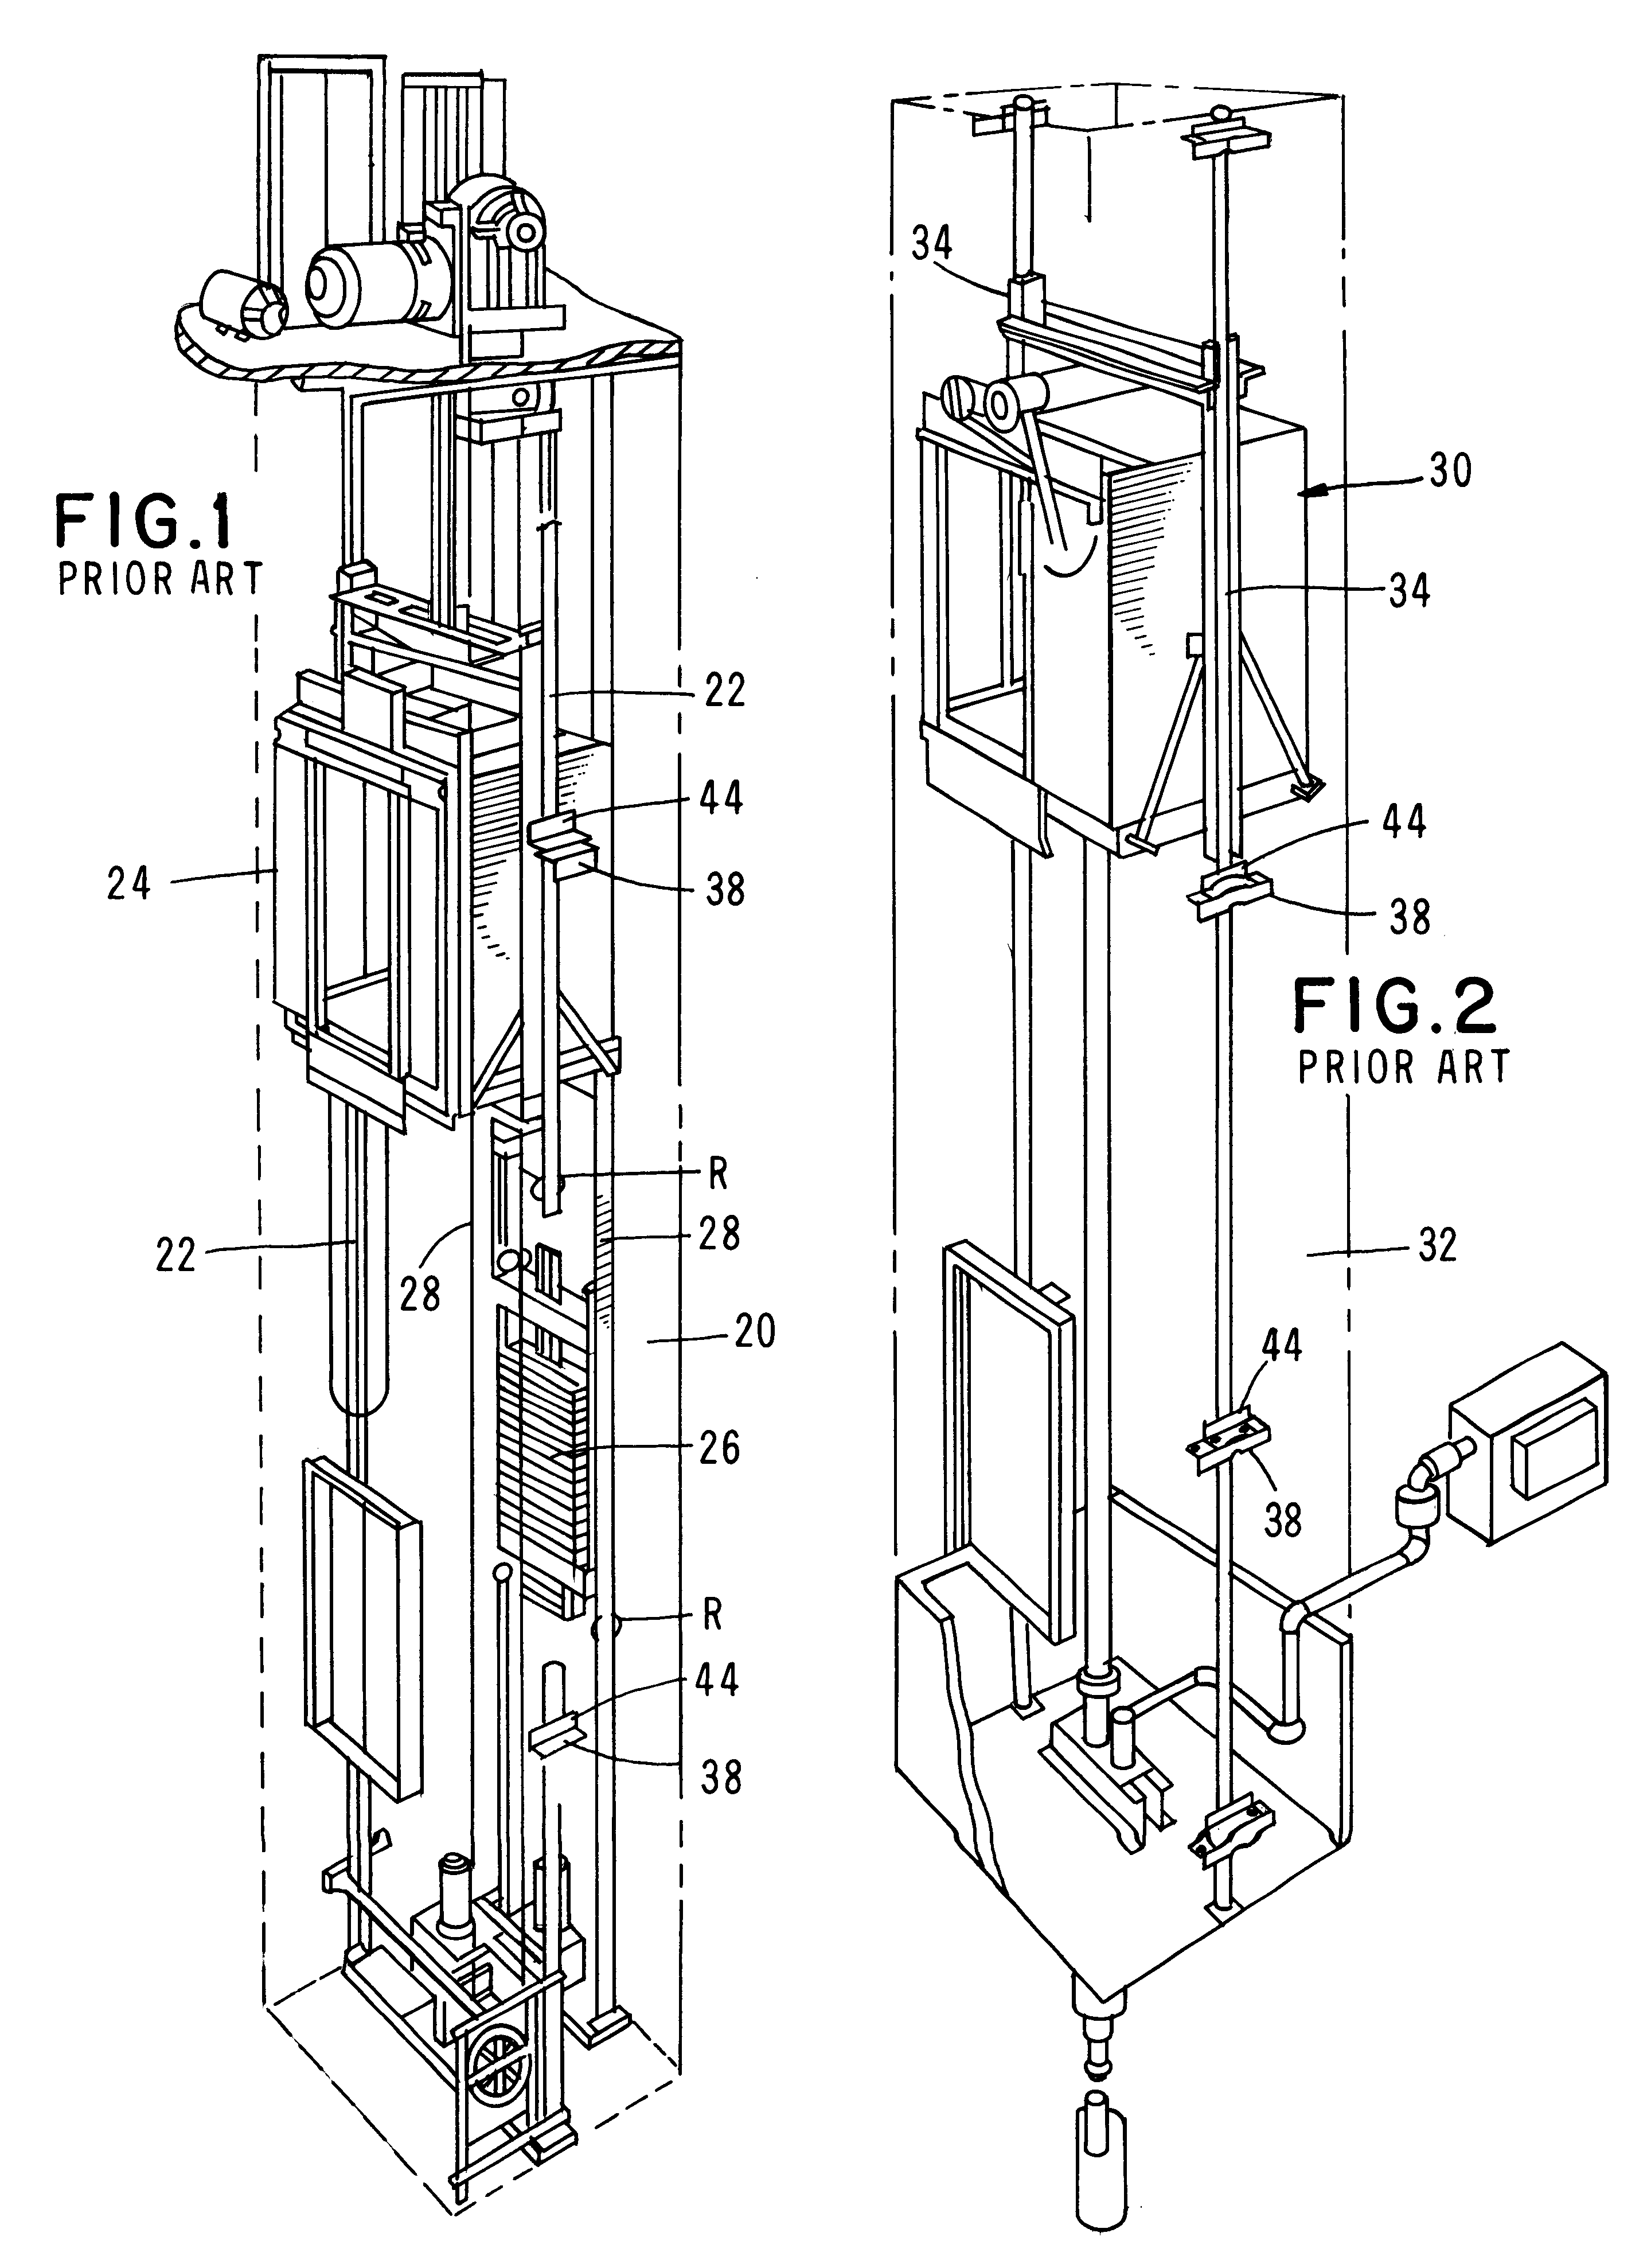 Method and apparatus for installing elevator car and counterweight guide rails